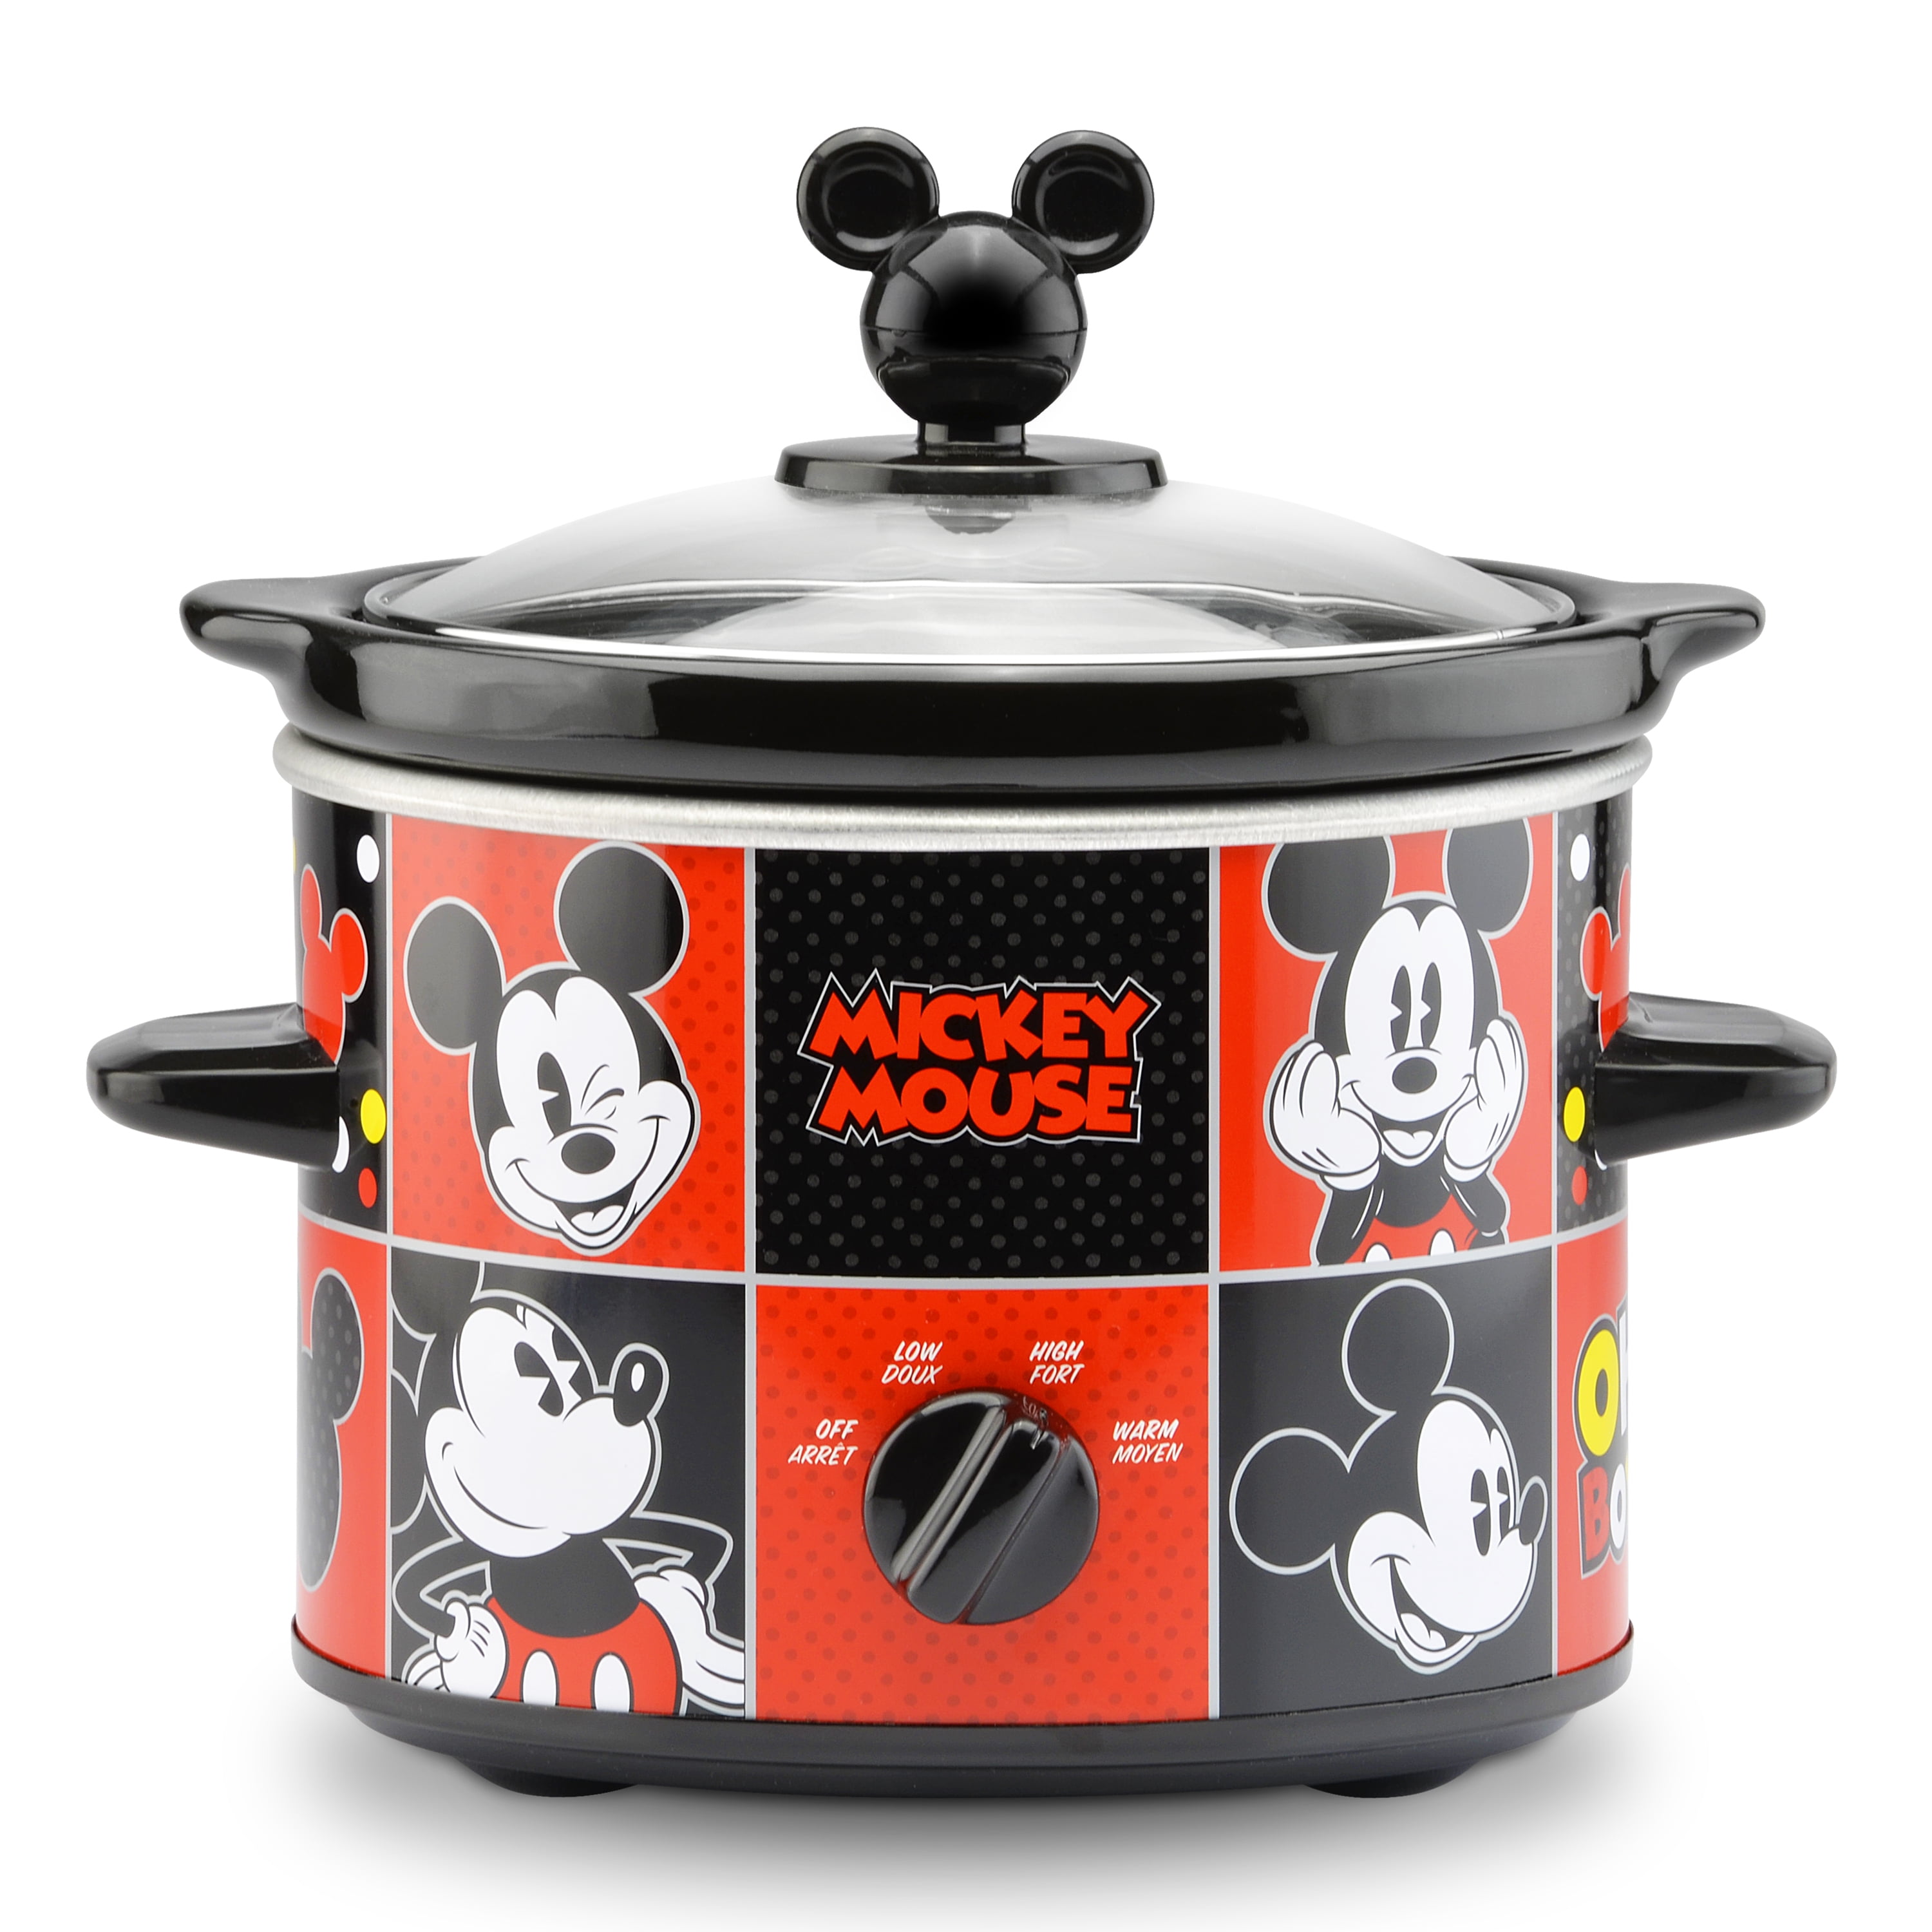 Disney Mickey Mouse 7Qt Digital Slow Cooker DCM-70 - The Home Depot